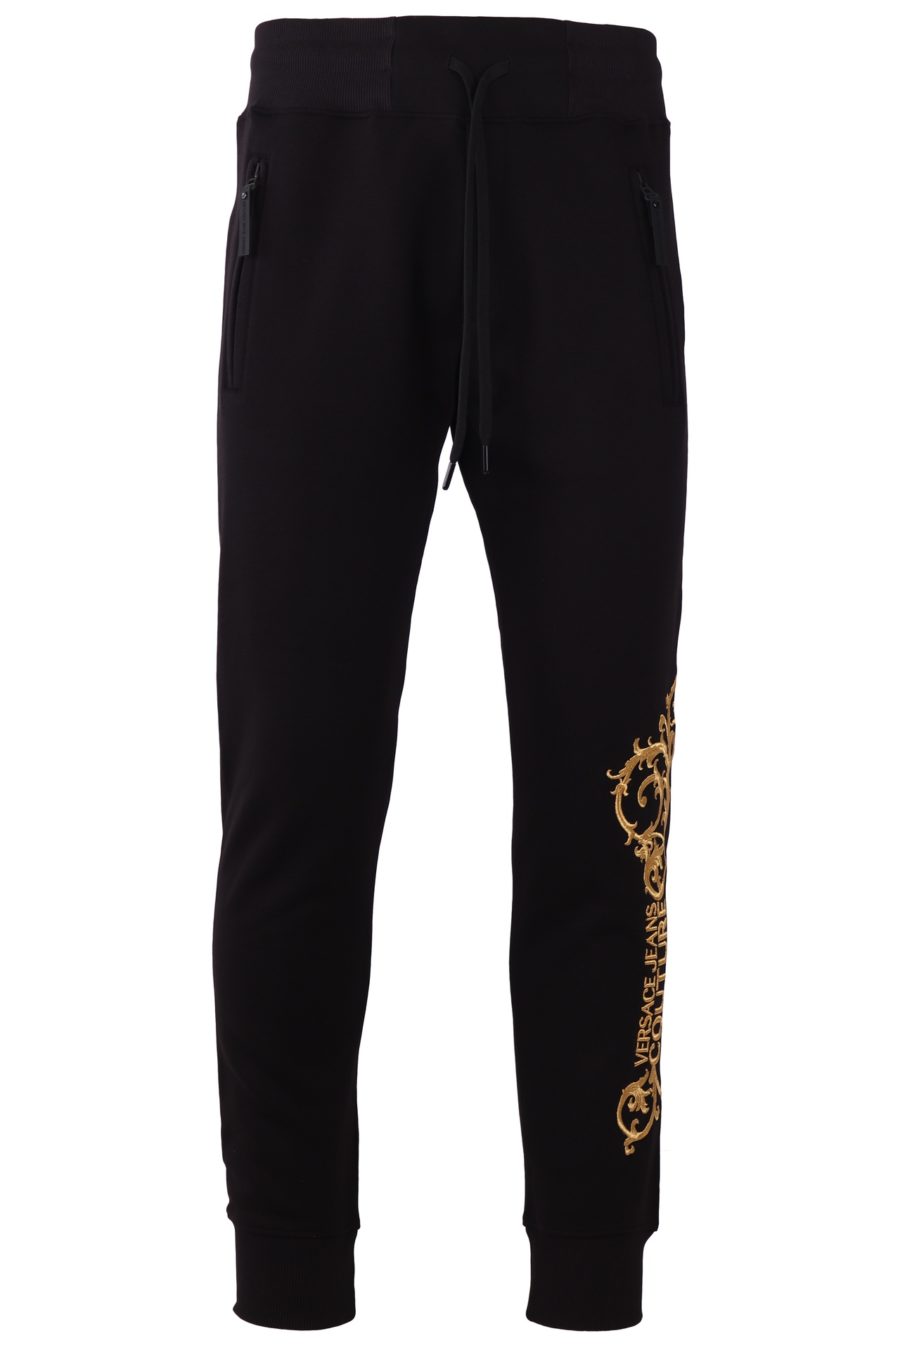 Tracksuit bottoms Versace Jeans Couture black with embroidered logo - a4f839fe744969423000ac1aebd5022d83b8b951